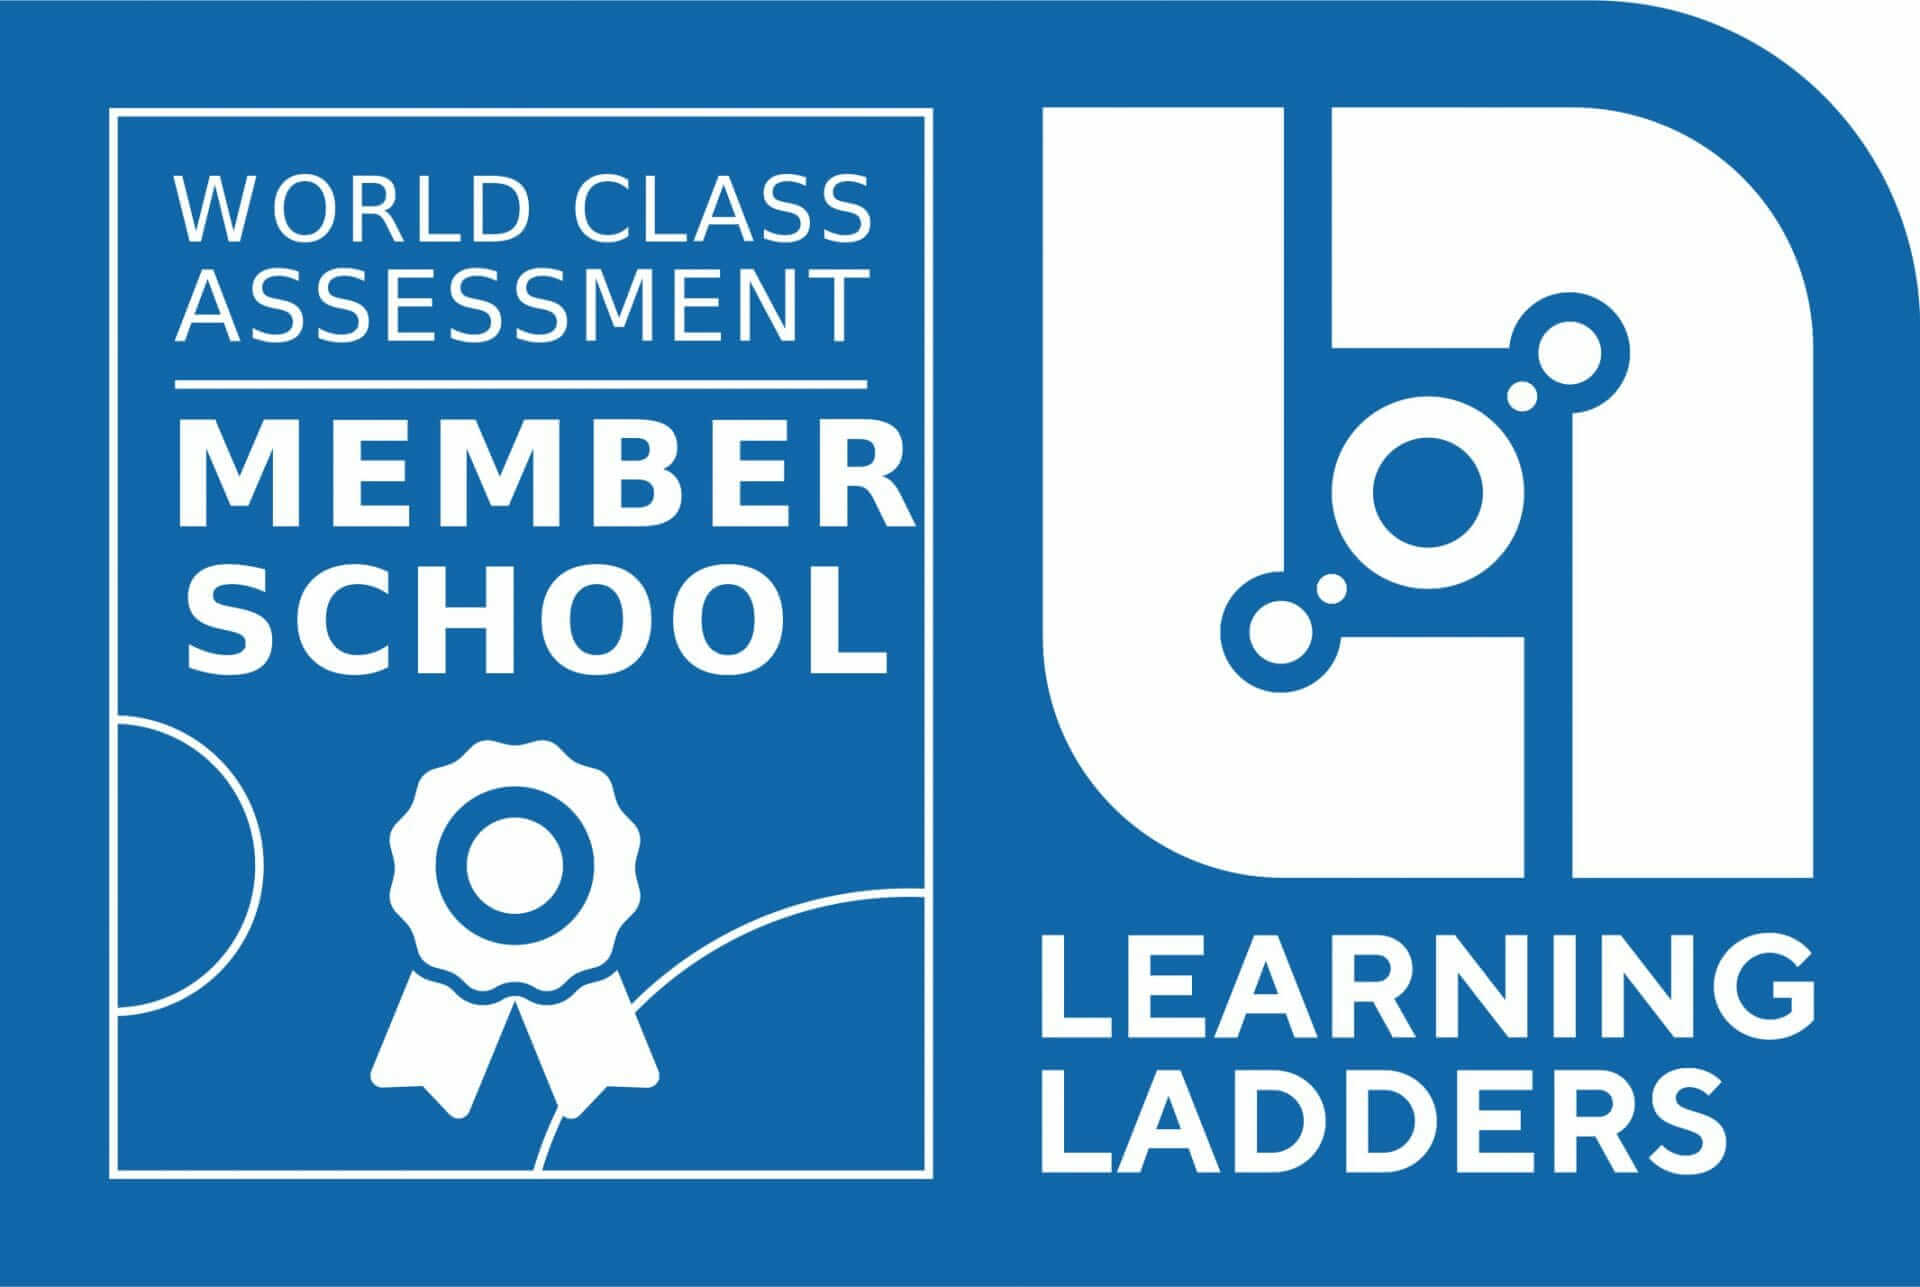 We Are Officially a Learning Ladders Member School